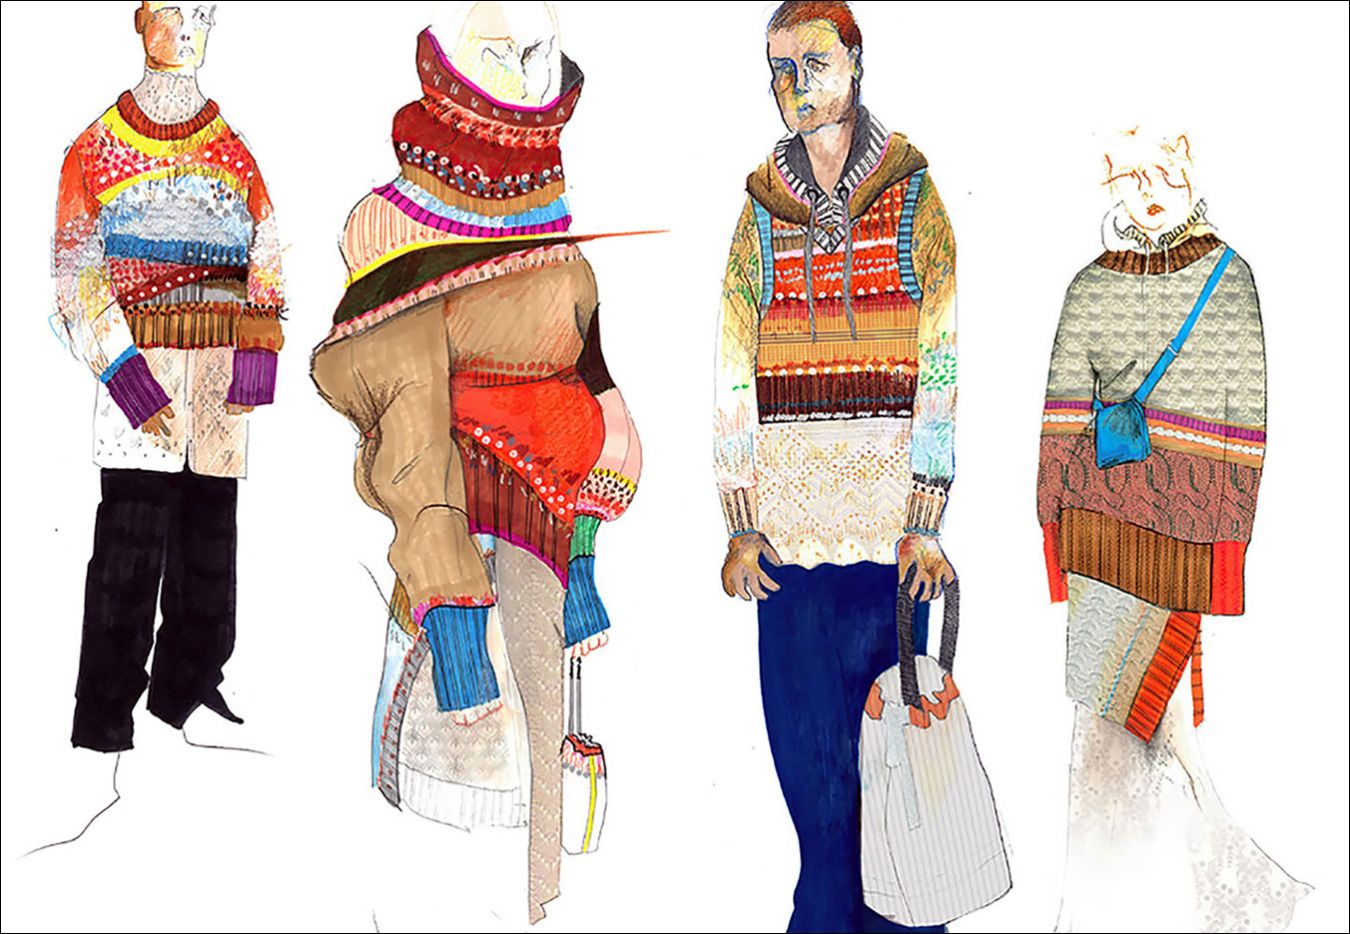 BA (Hons) Fashion student Nandita Shah used bold colours for the knitwear designs in her final collection. Kingston School of Art places emphasis on strong illustration skills.